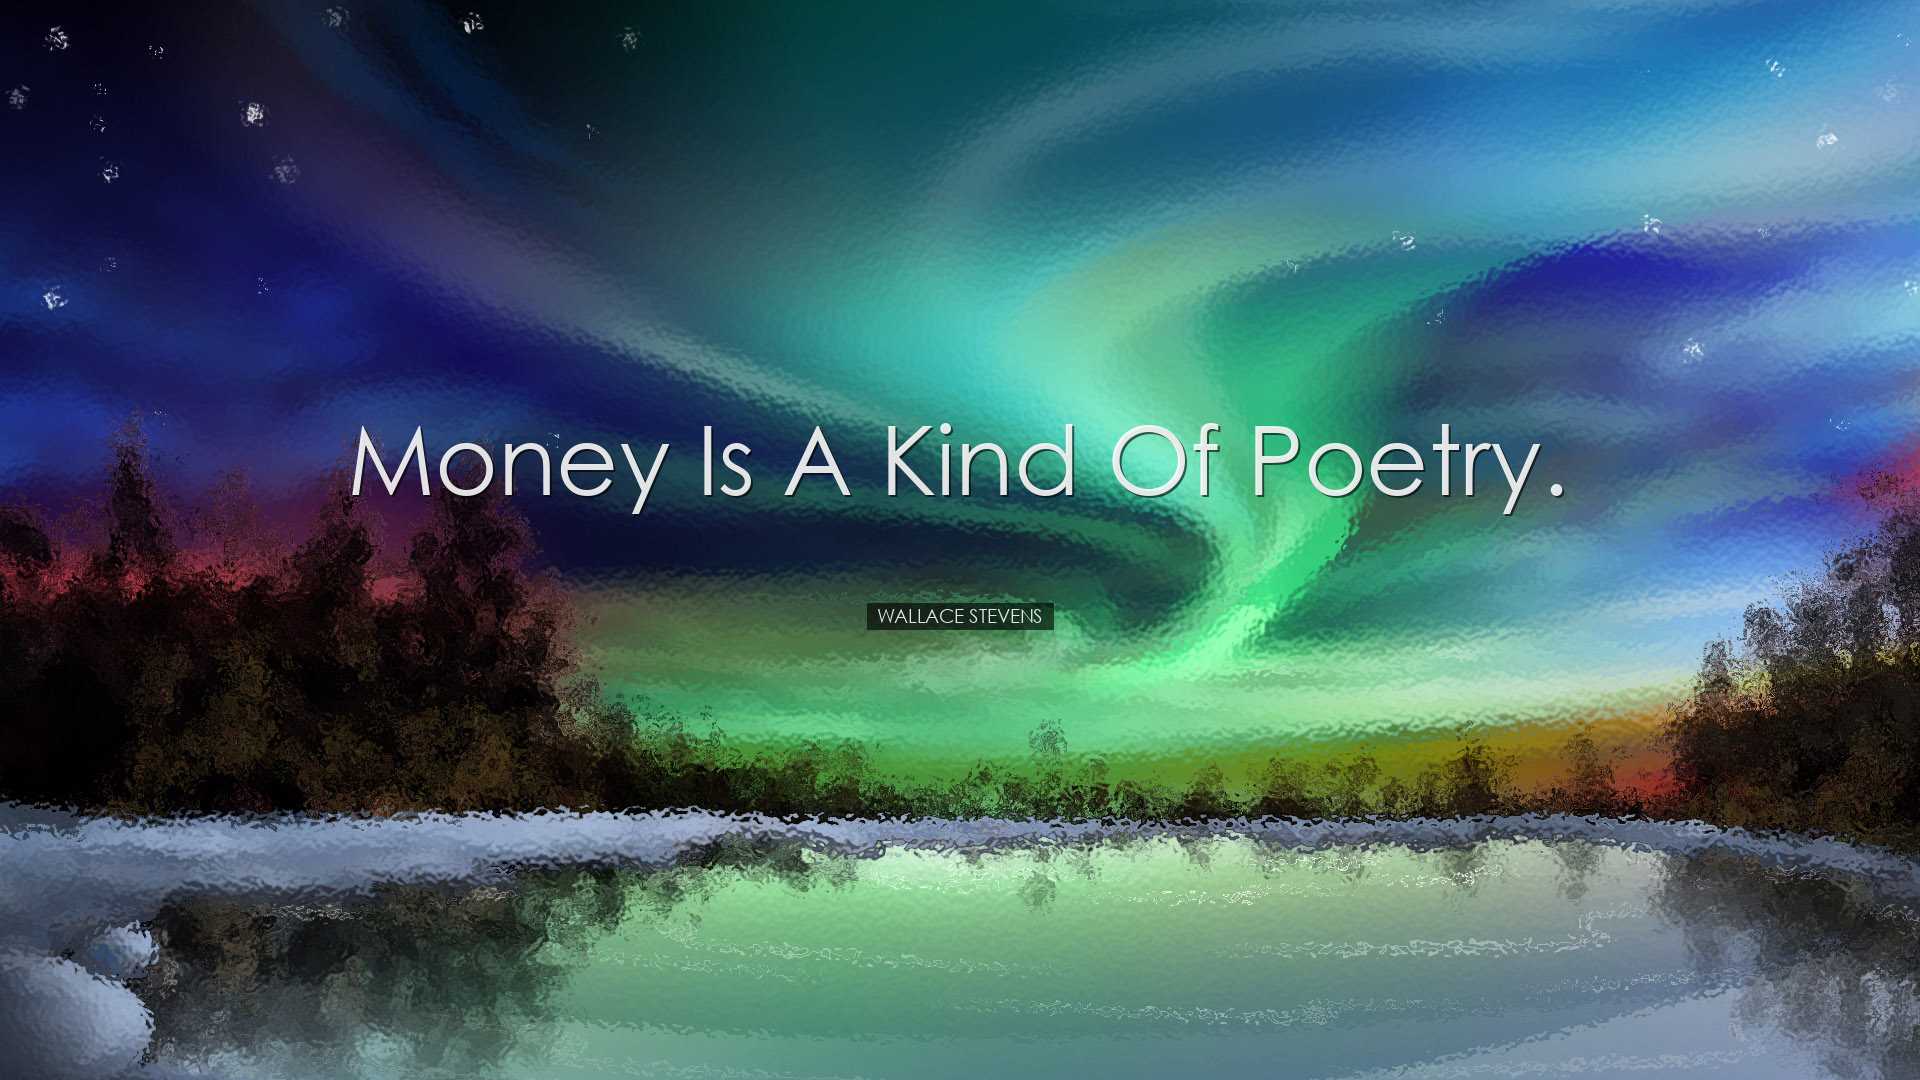 Money is a kind of poetry. - Wallace Stevens